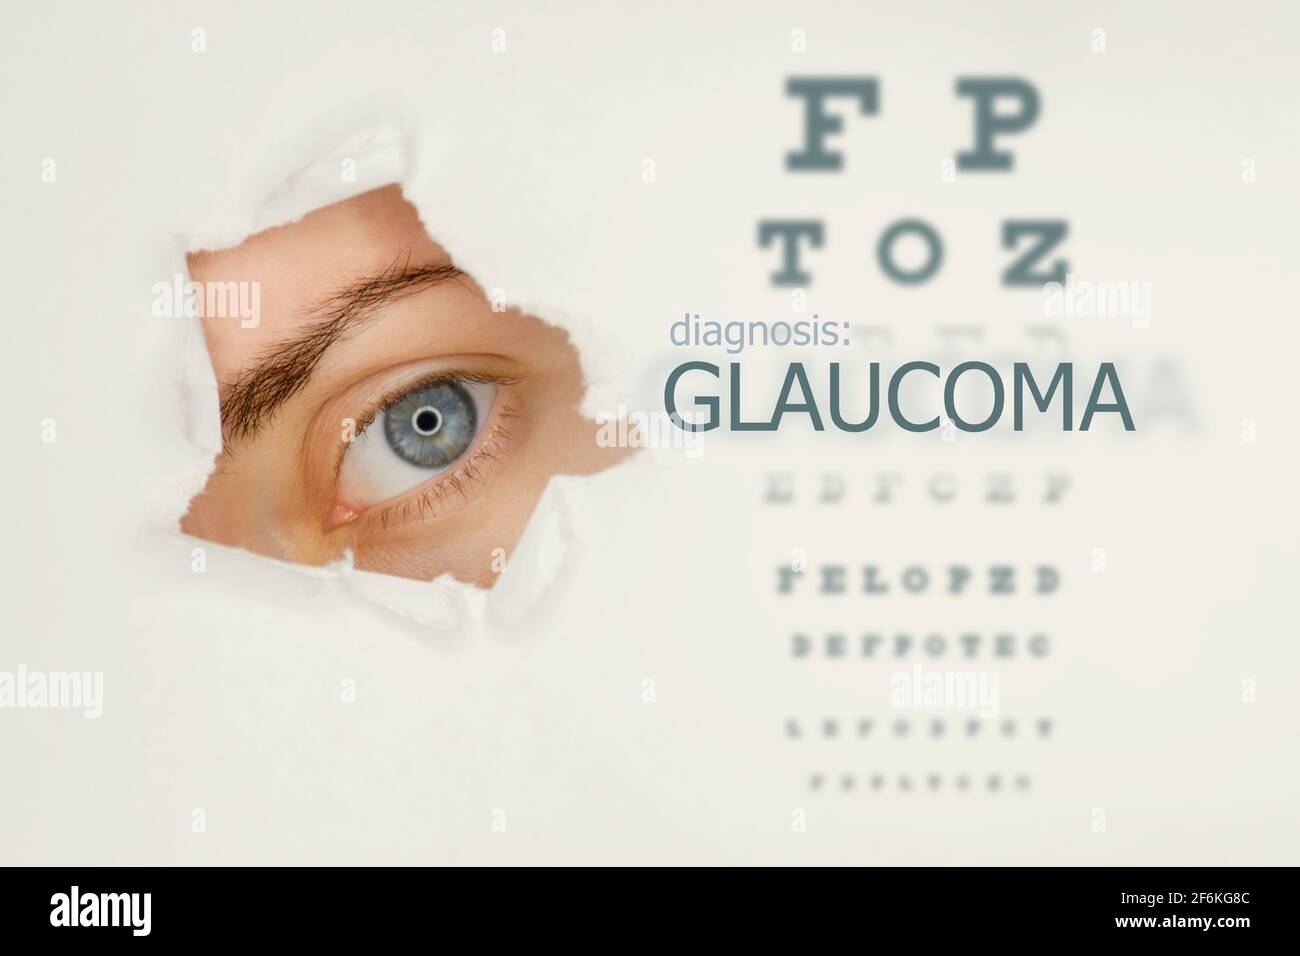 Woman`s eye looking trough teared hole in paper, eye test and word Glaucoma on right. Eye disease concept template. Grey background. Stock Photo